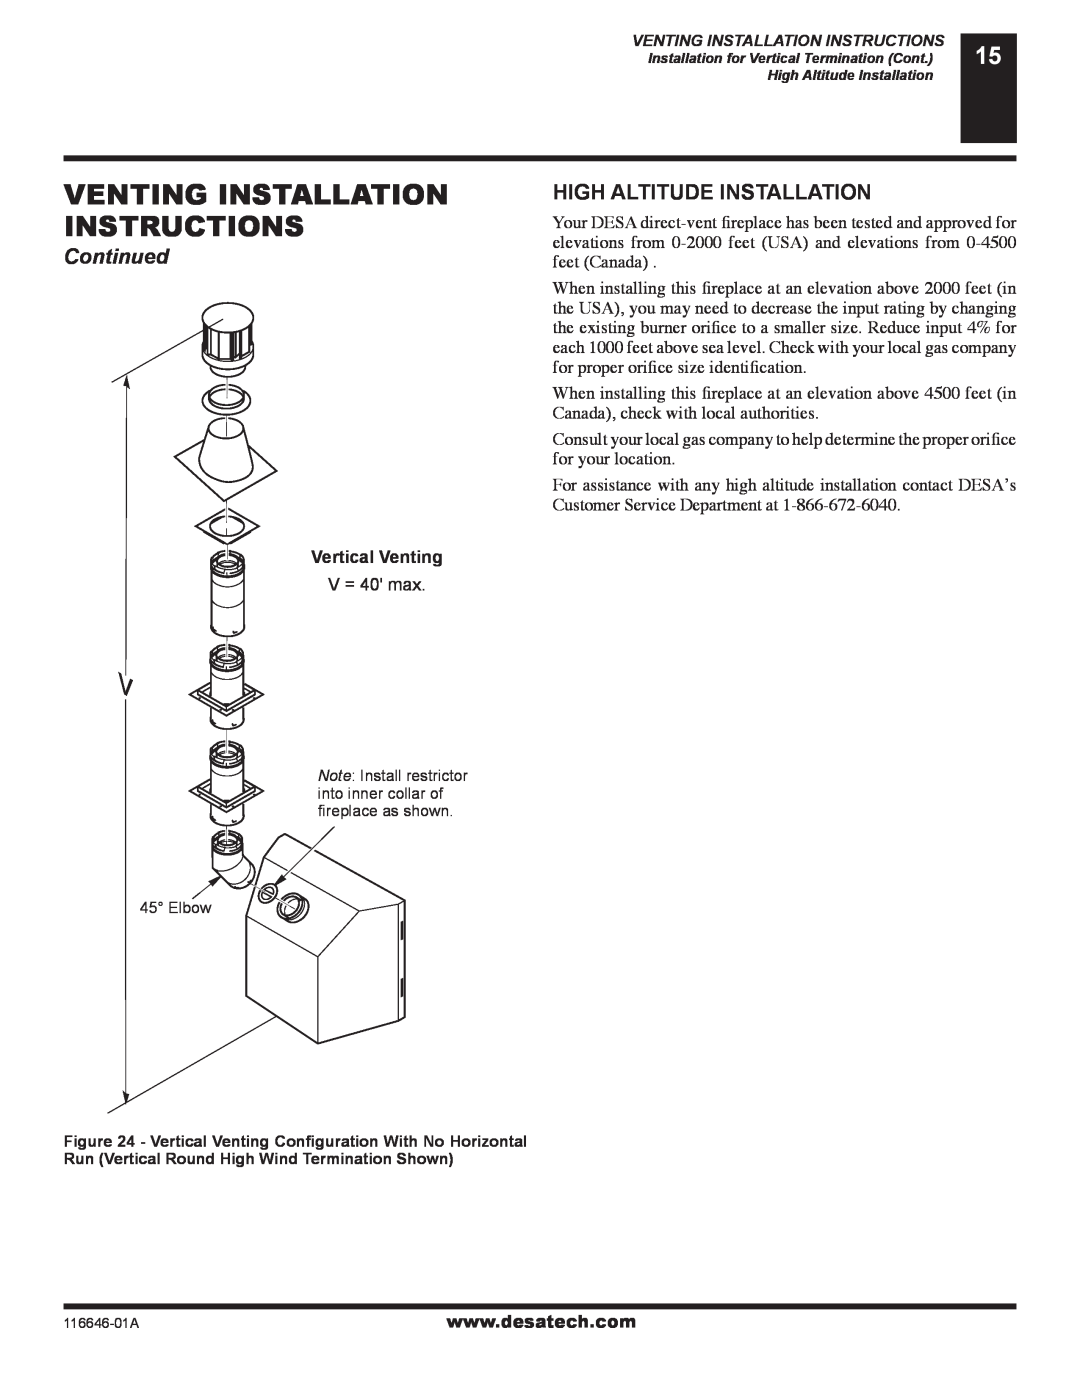 Desa (V)T32N-A Series, CGDV32NR Venting Installation Instructions, Continued, High Altitude Installation, Vertical Venting 